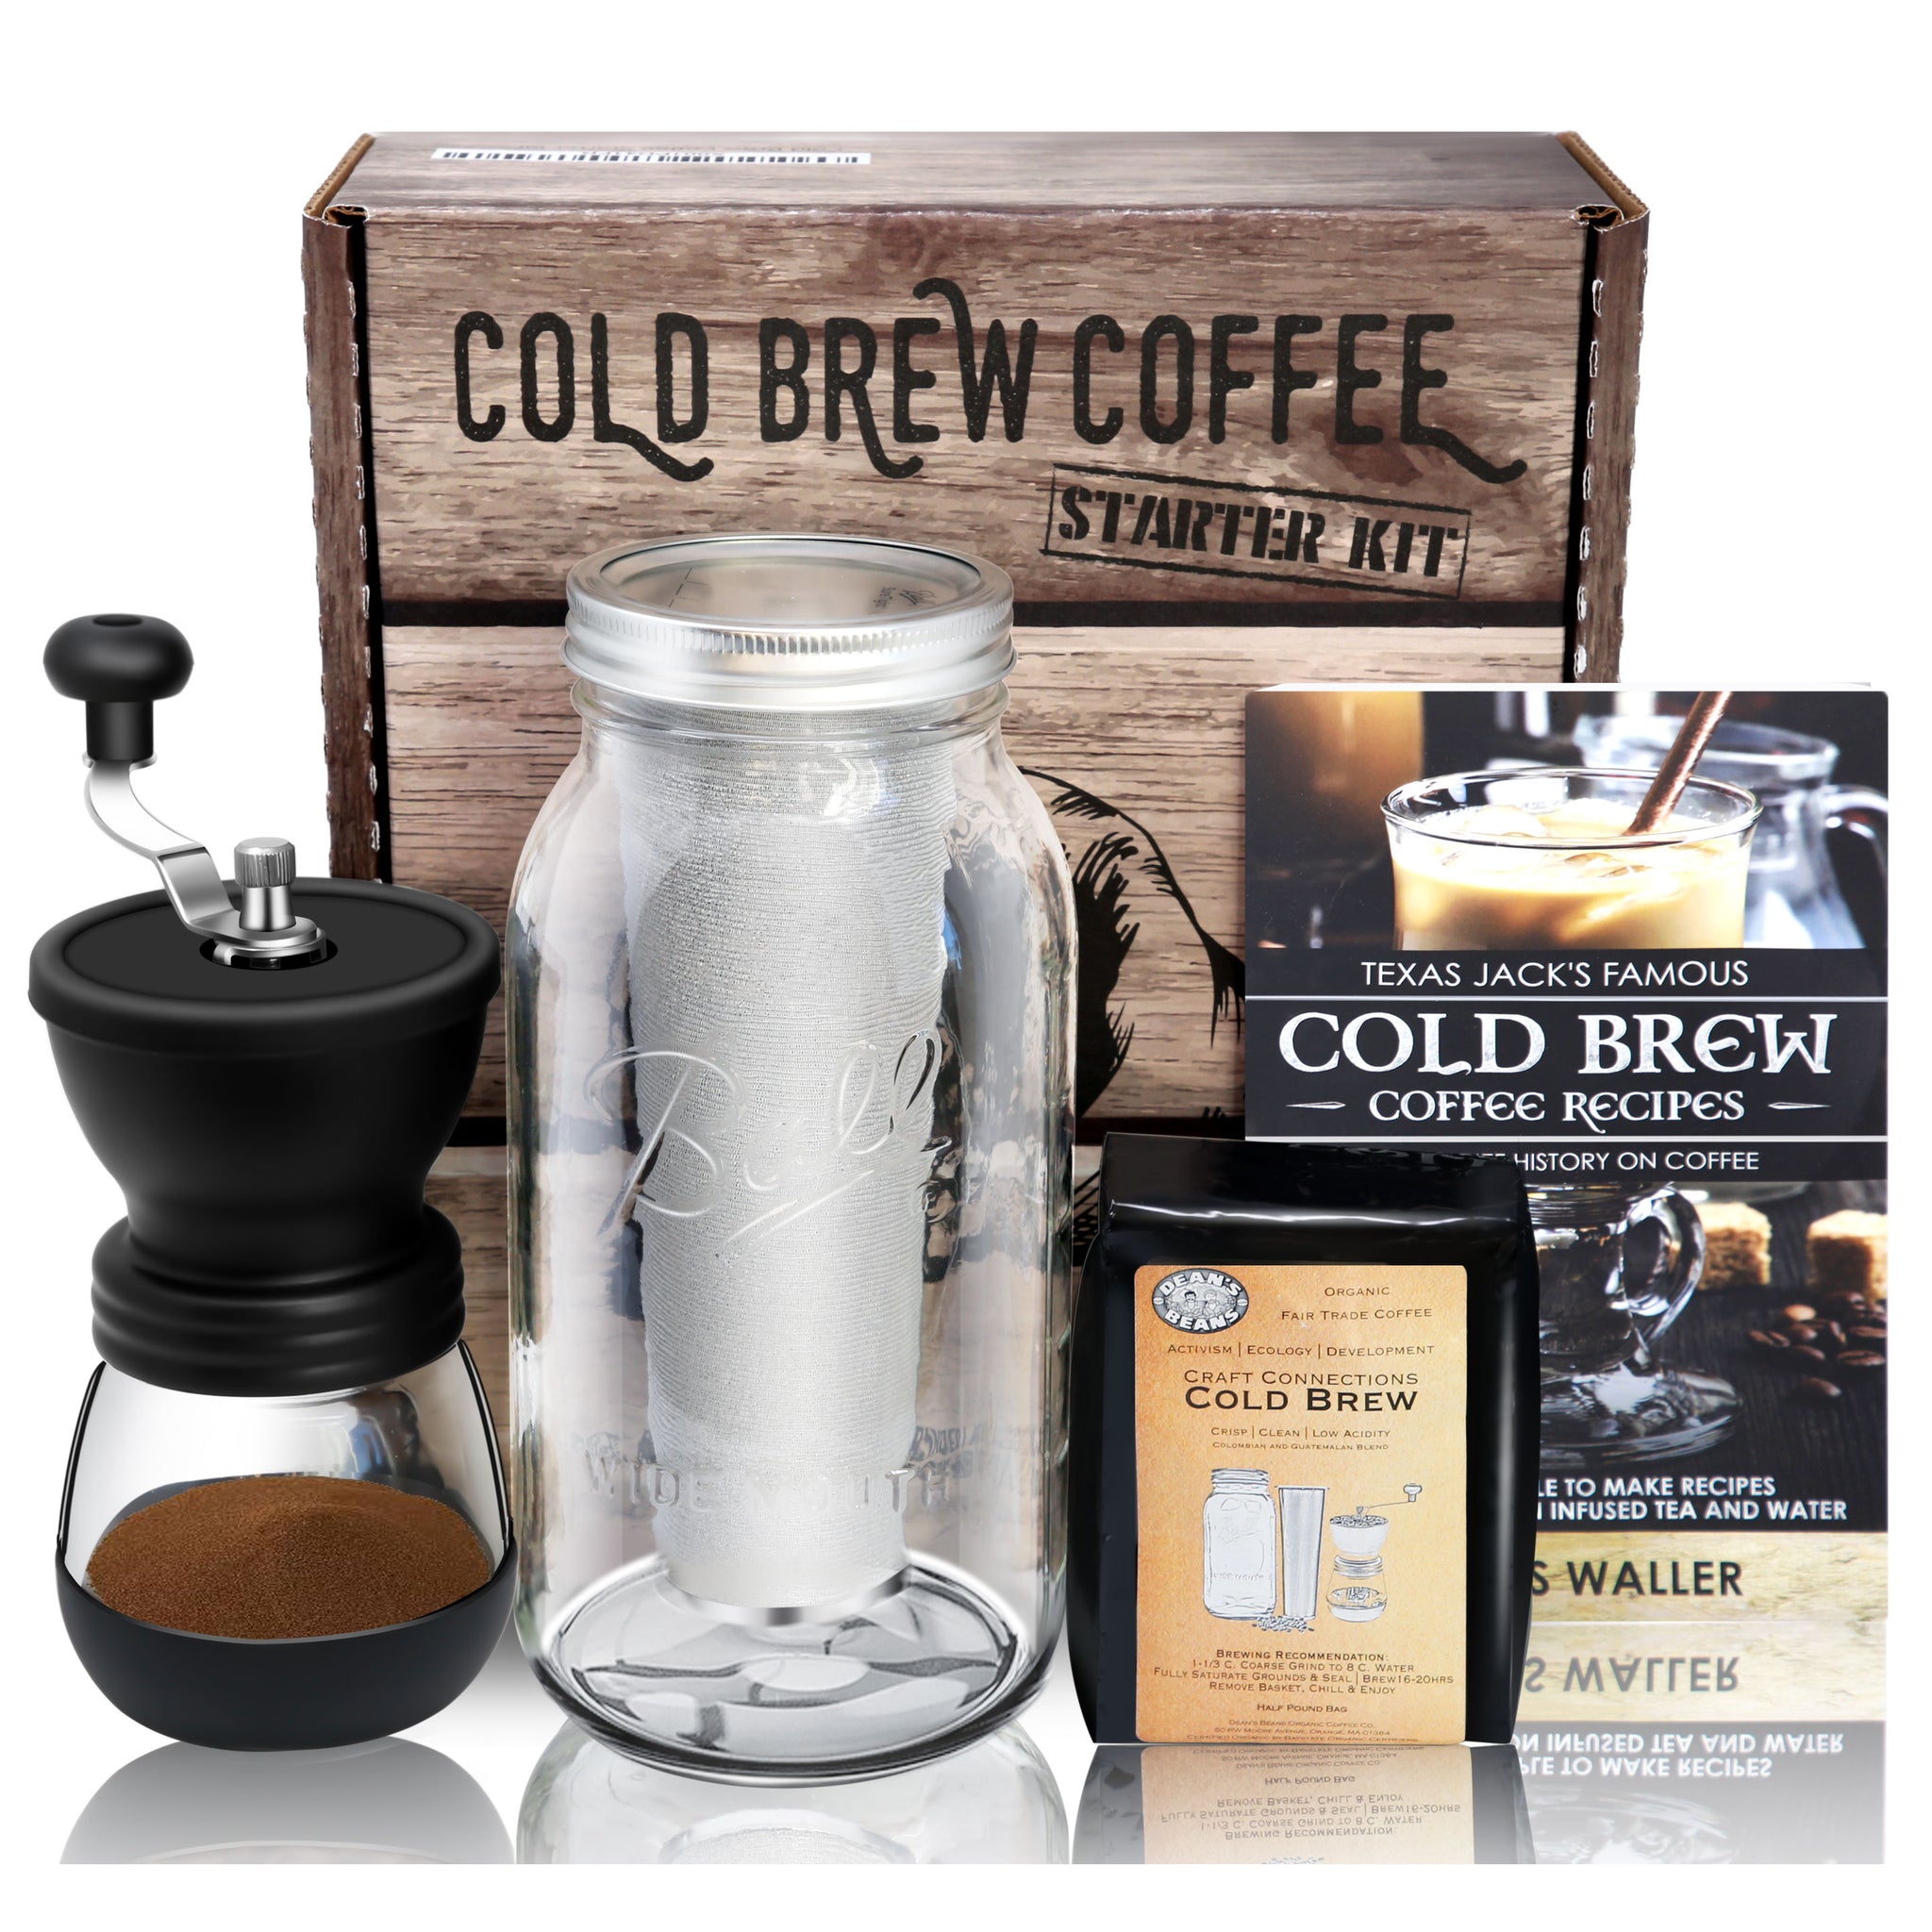 ORGANIC Cold Brew Coffee Pitcher Pack - Colombian Coffee